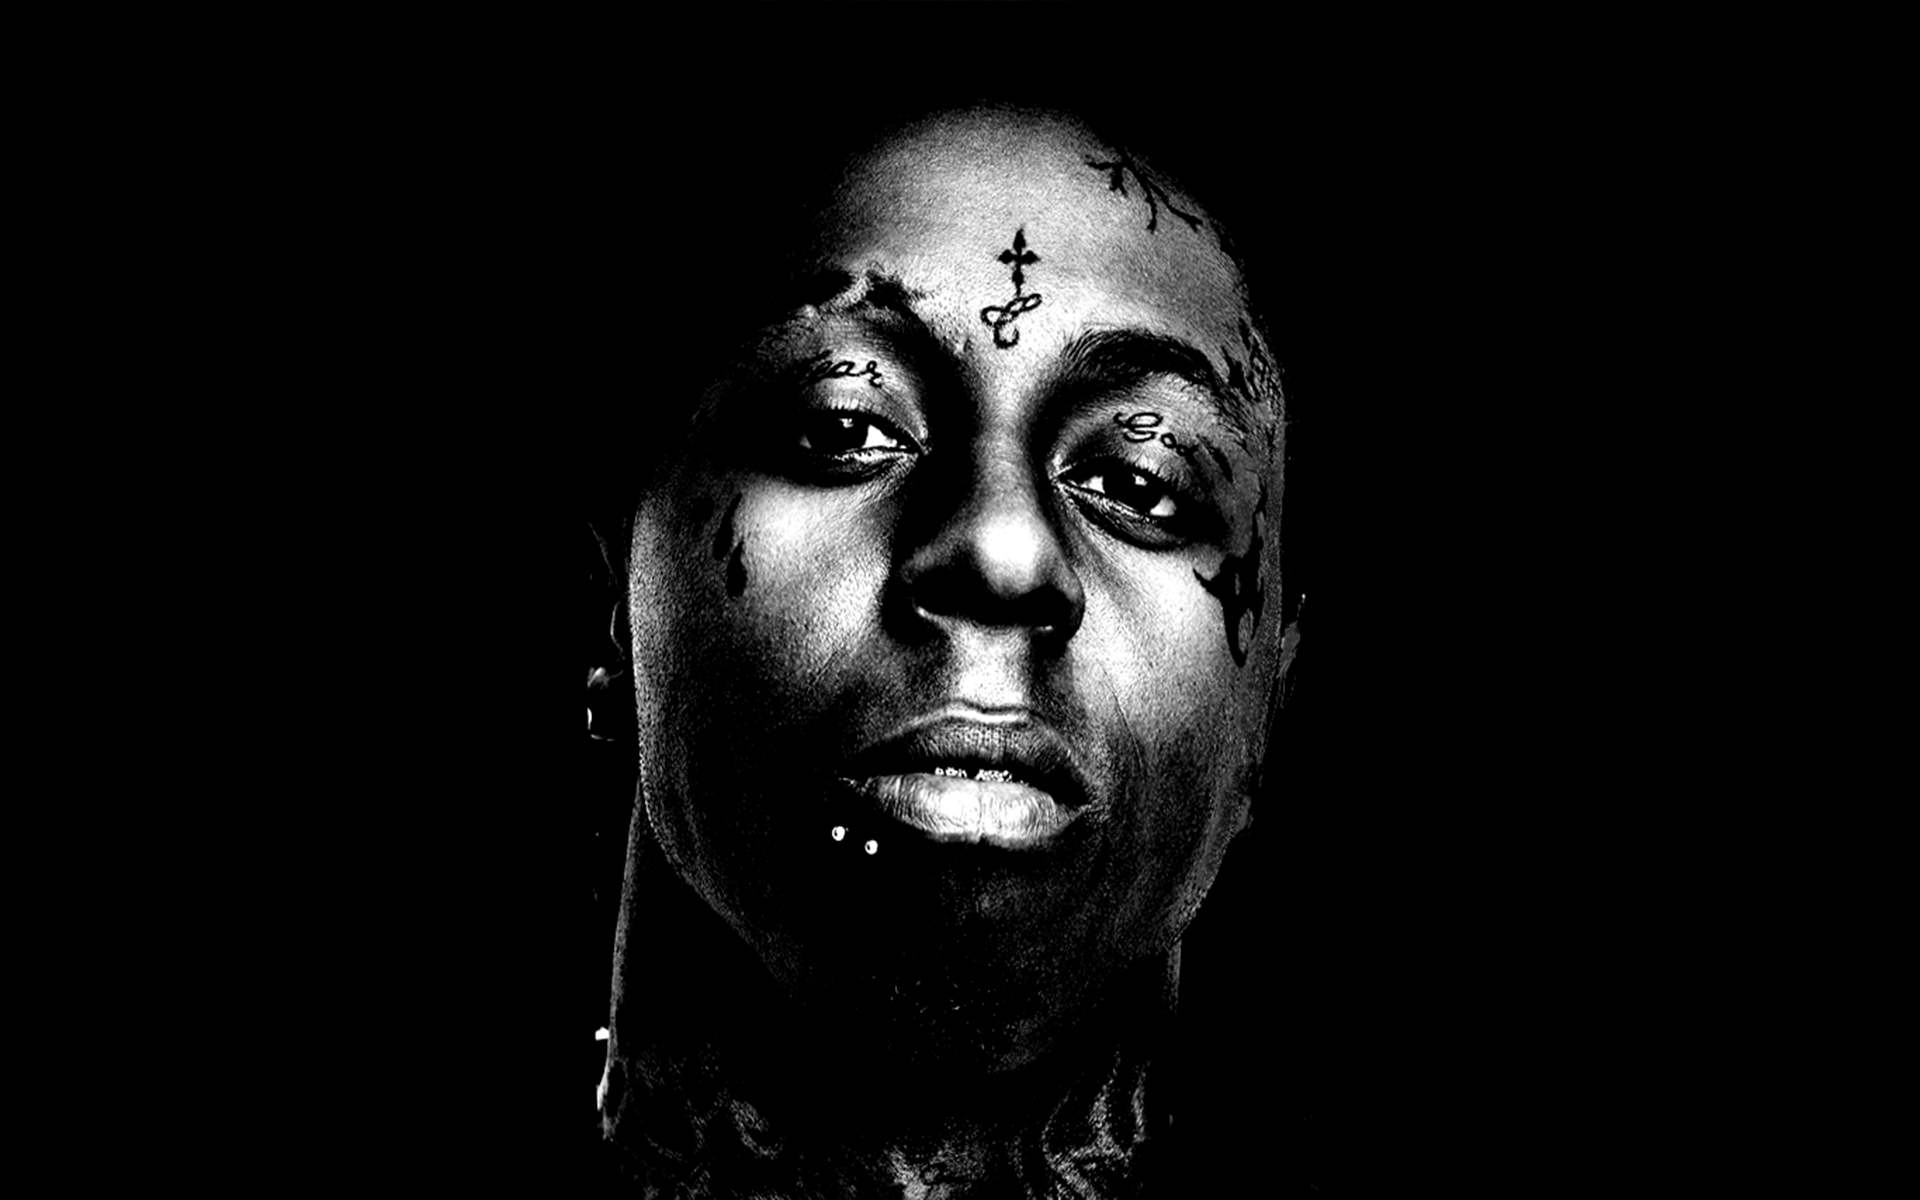 Lil Wayne Free Wallpapers - Wallpaper, High Definition, High Quality, Widescreen1920 x 1200